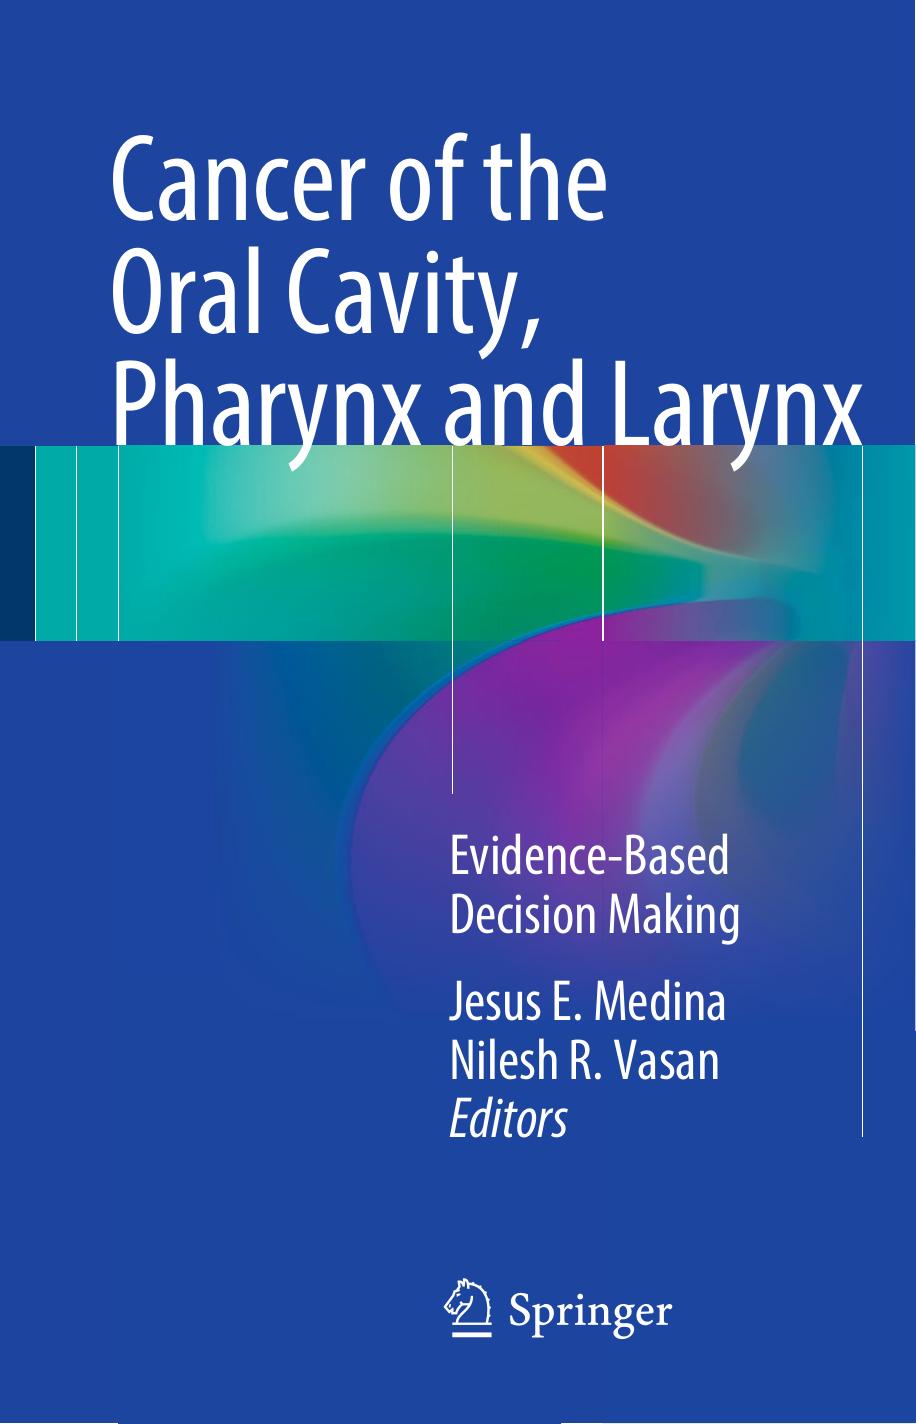 Cancer of the Oral Cavity, Pharynx and Larynx Evidence-Based Decision Making ( PDFDrive )